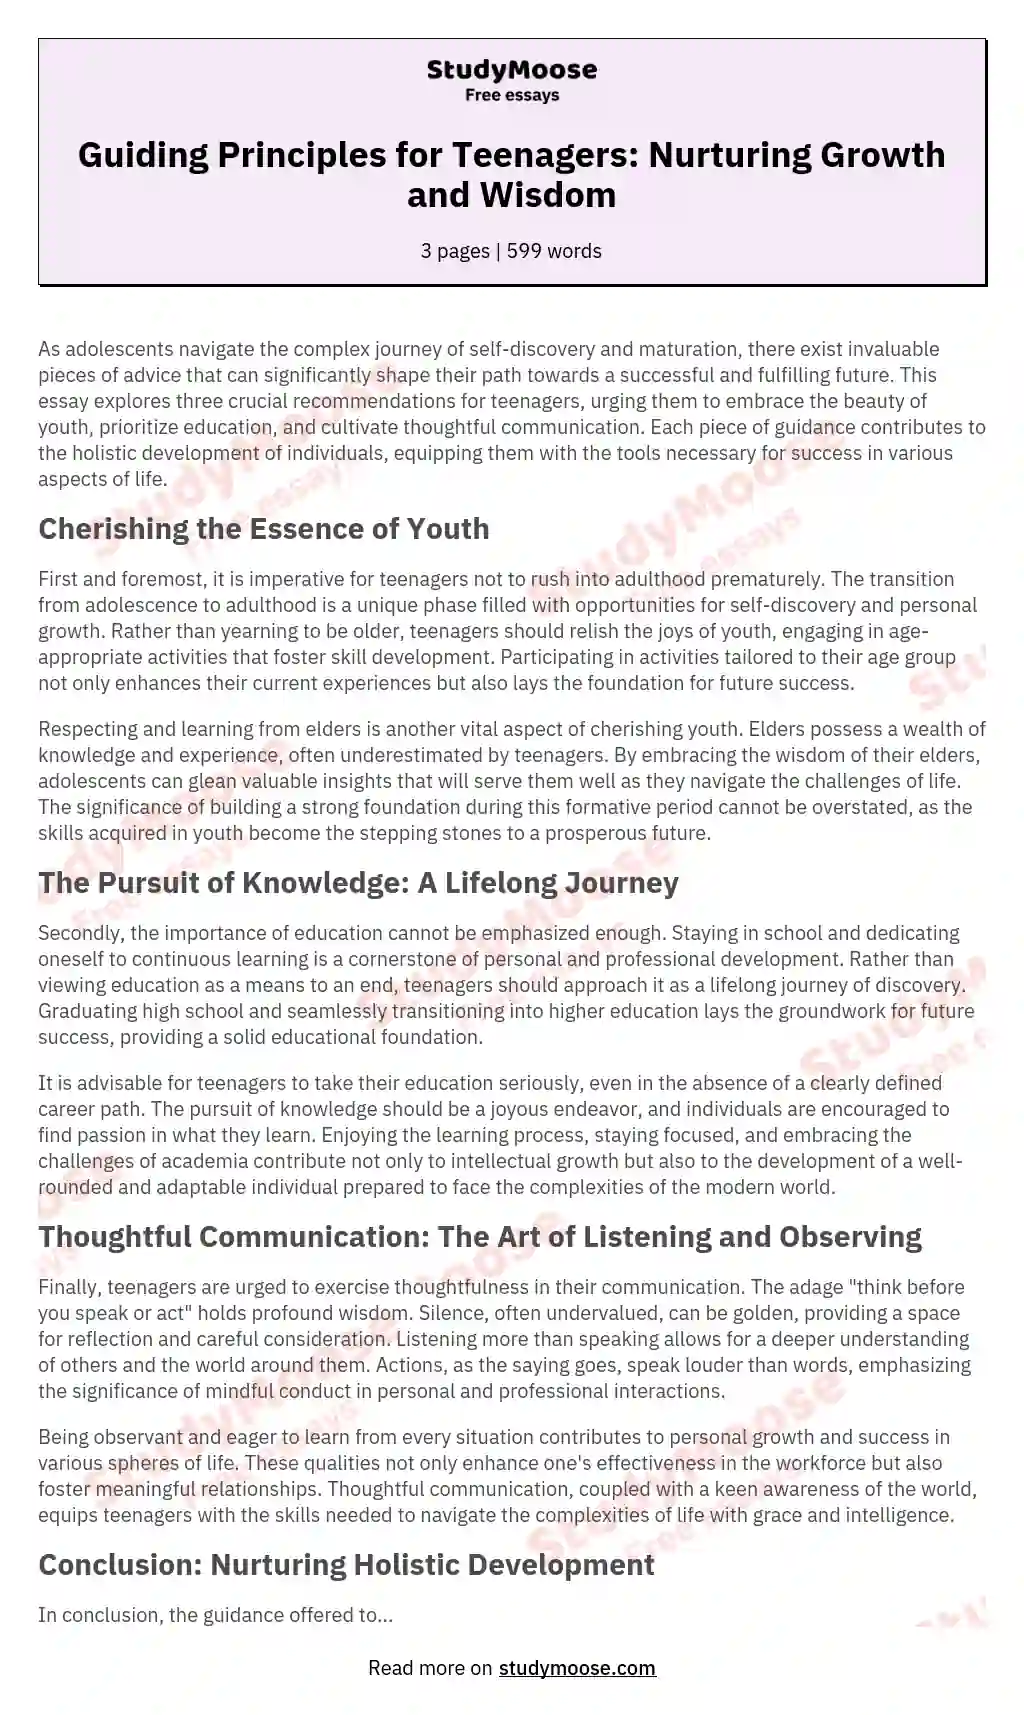 Guiding Principles for Teenagers: Nurturing Growth and Wisdom essay